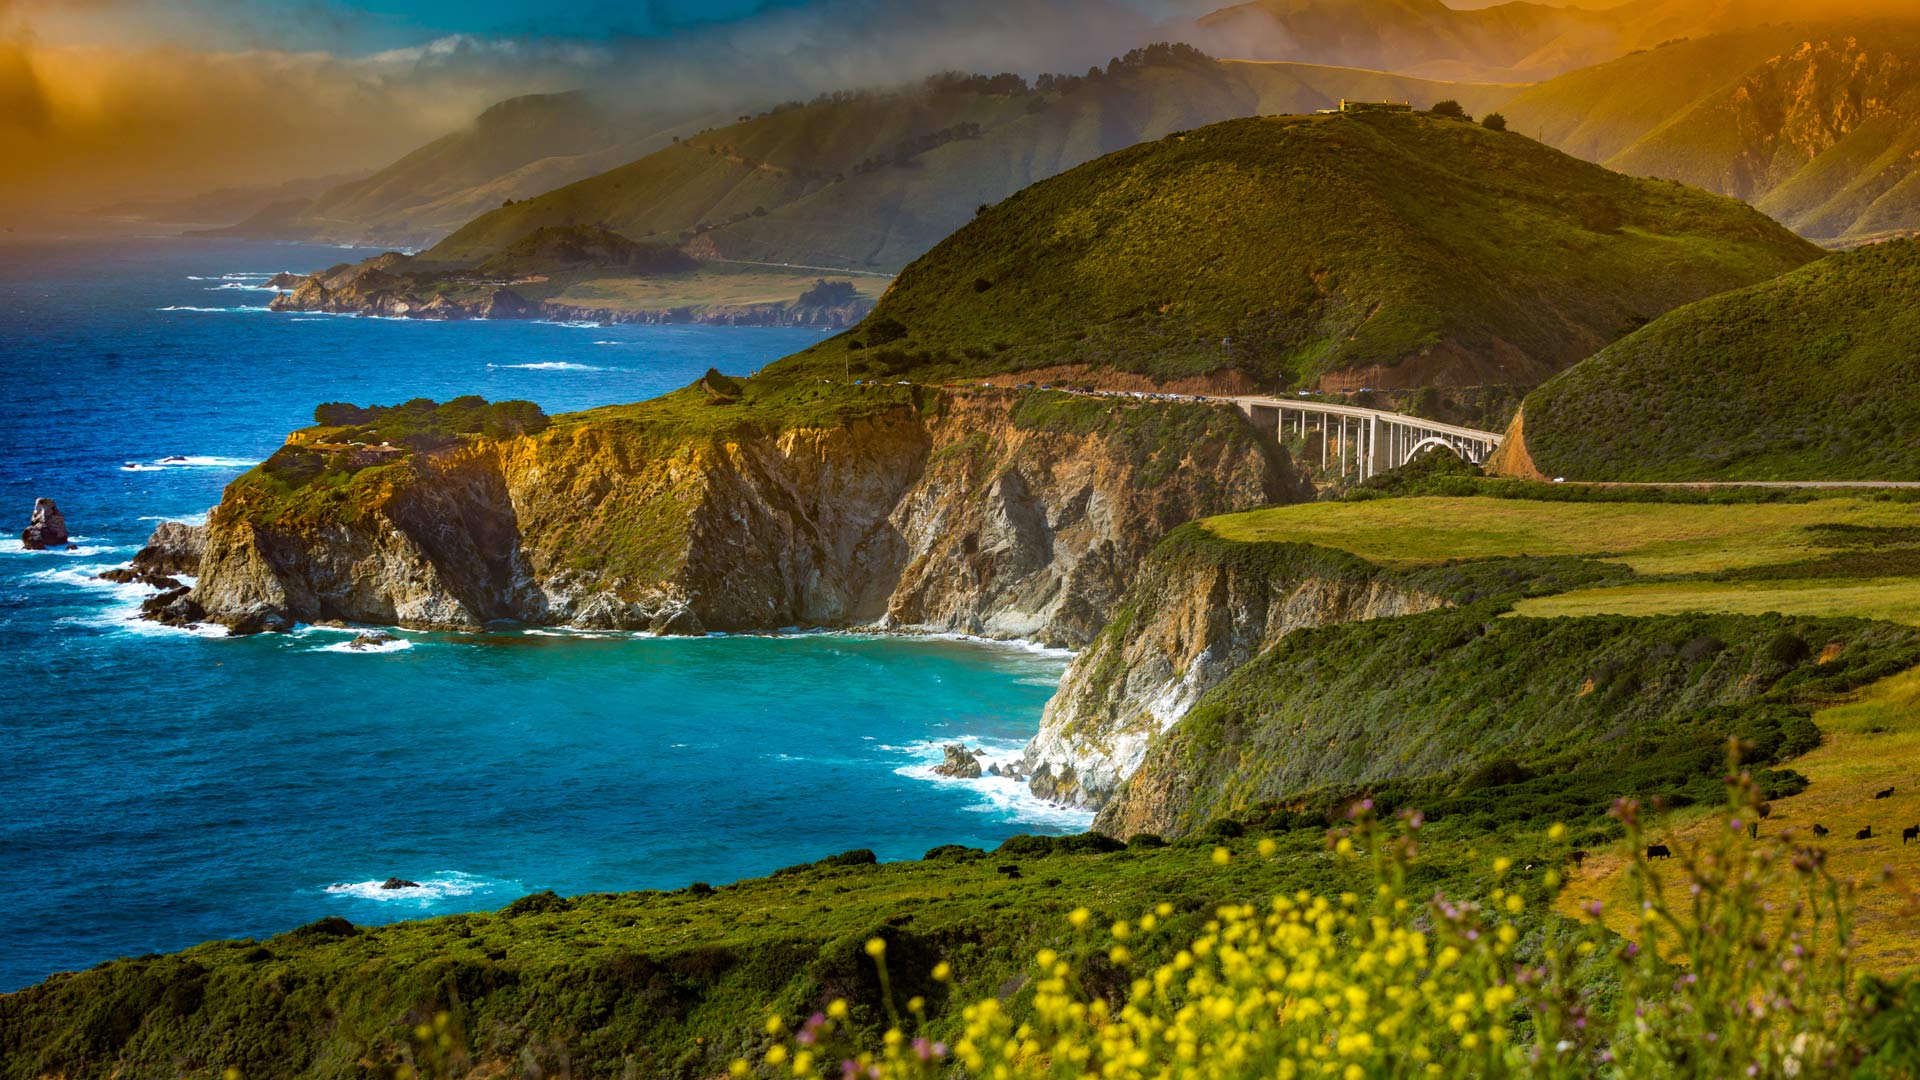 Landscape image of cliffs on the edge of the deep blue ocean with the sun setting and a bridge in the far distance.